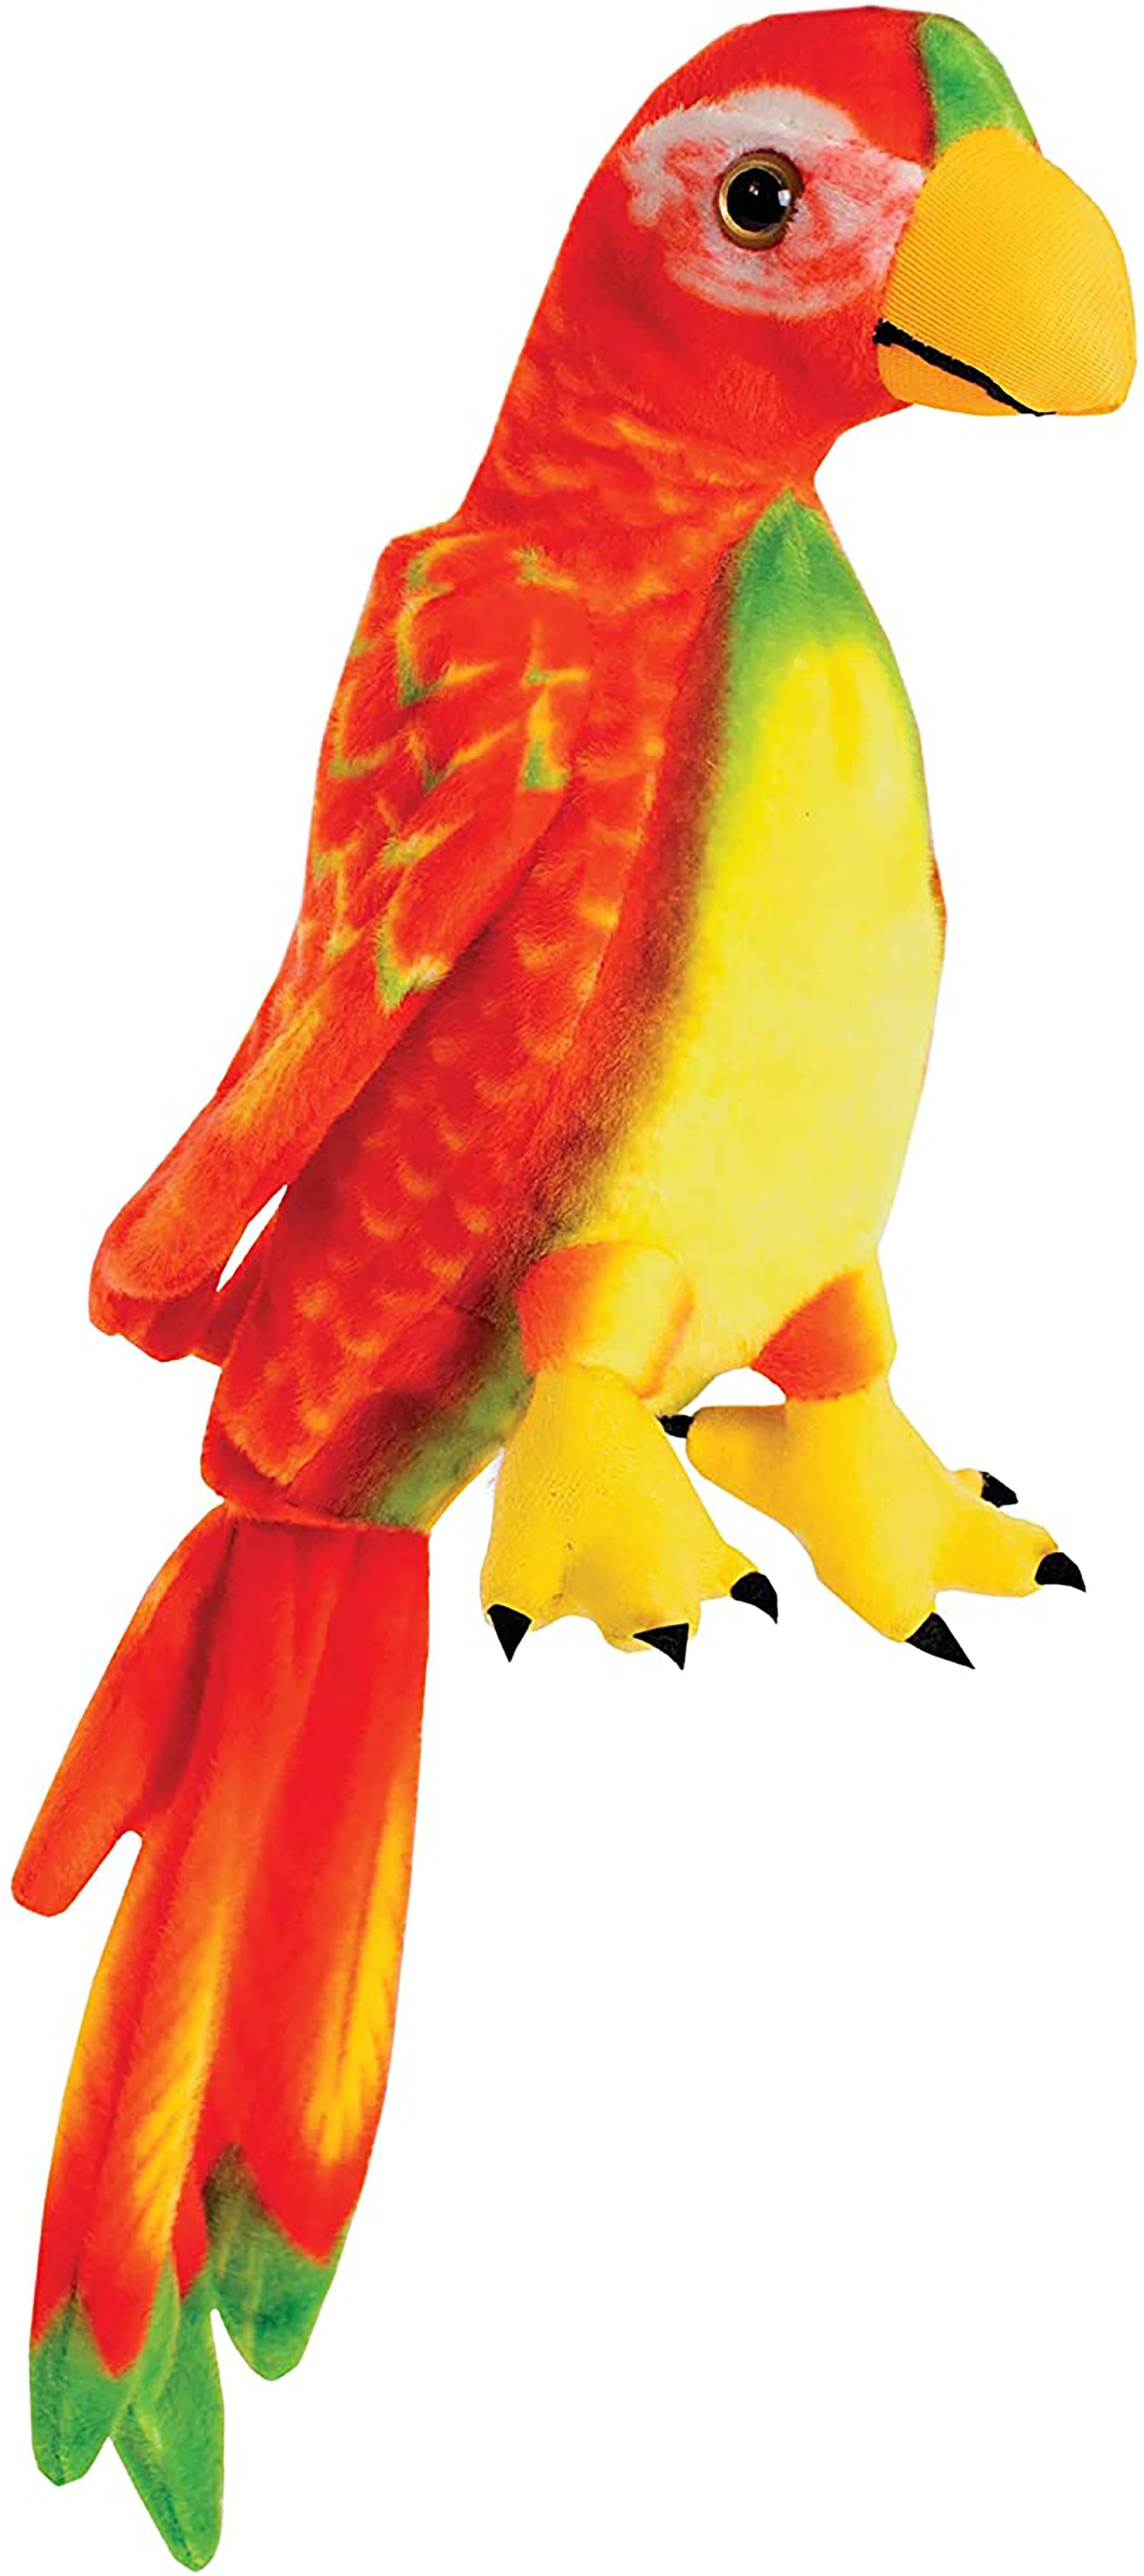 Real Planet Parrot Red 12 Inch Realistic Soft Plush